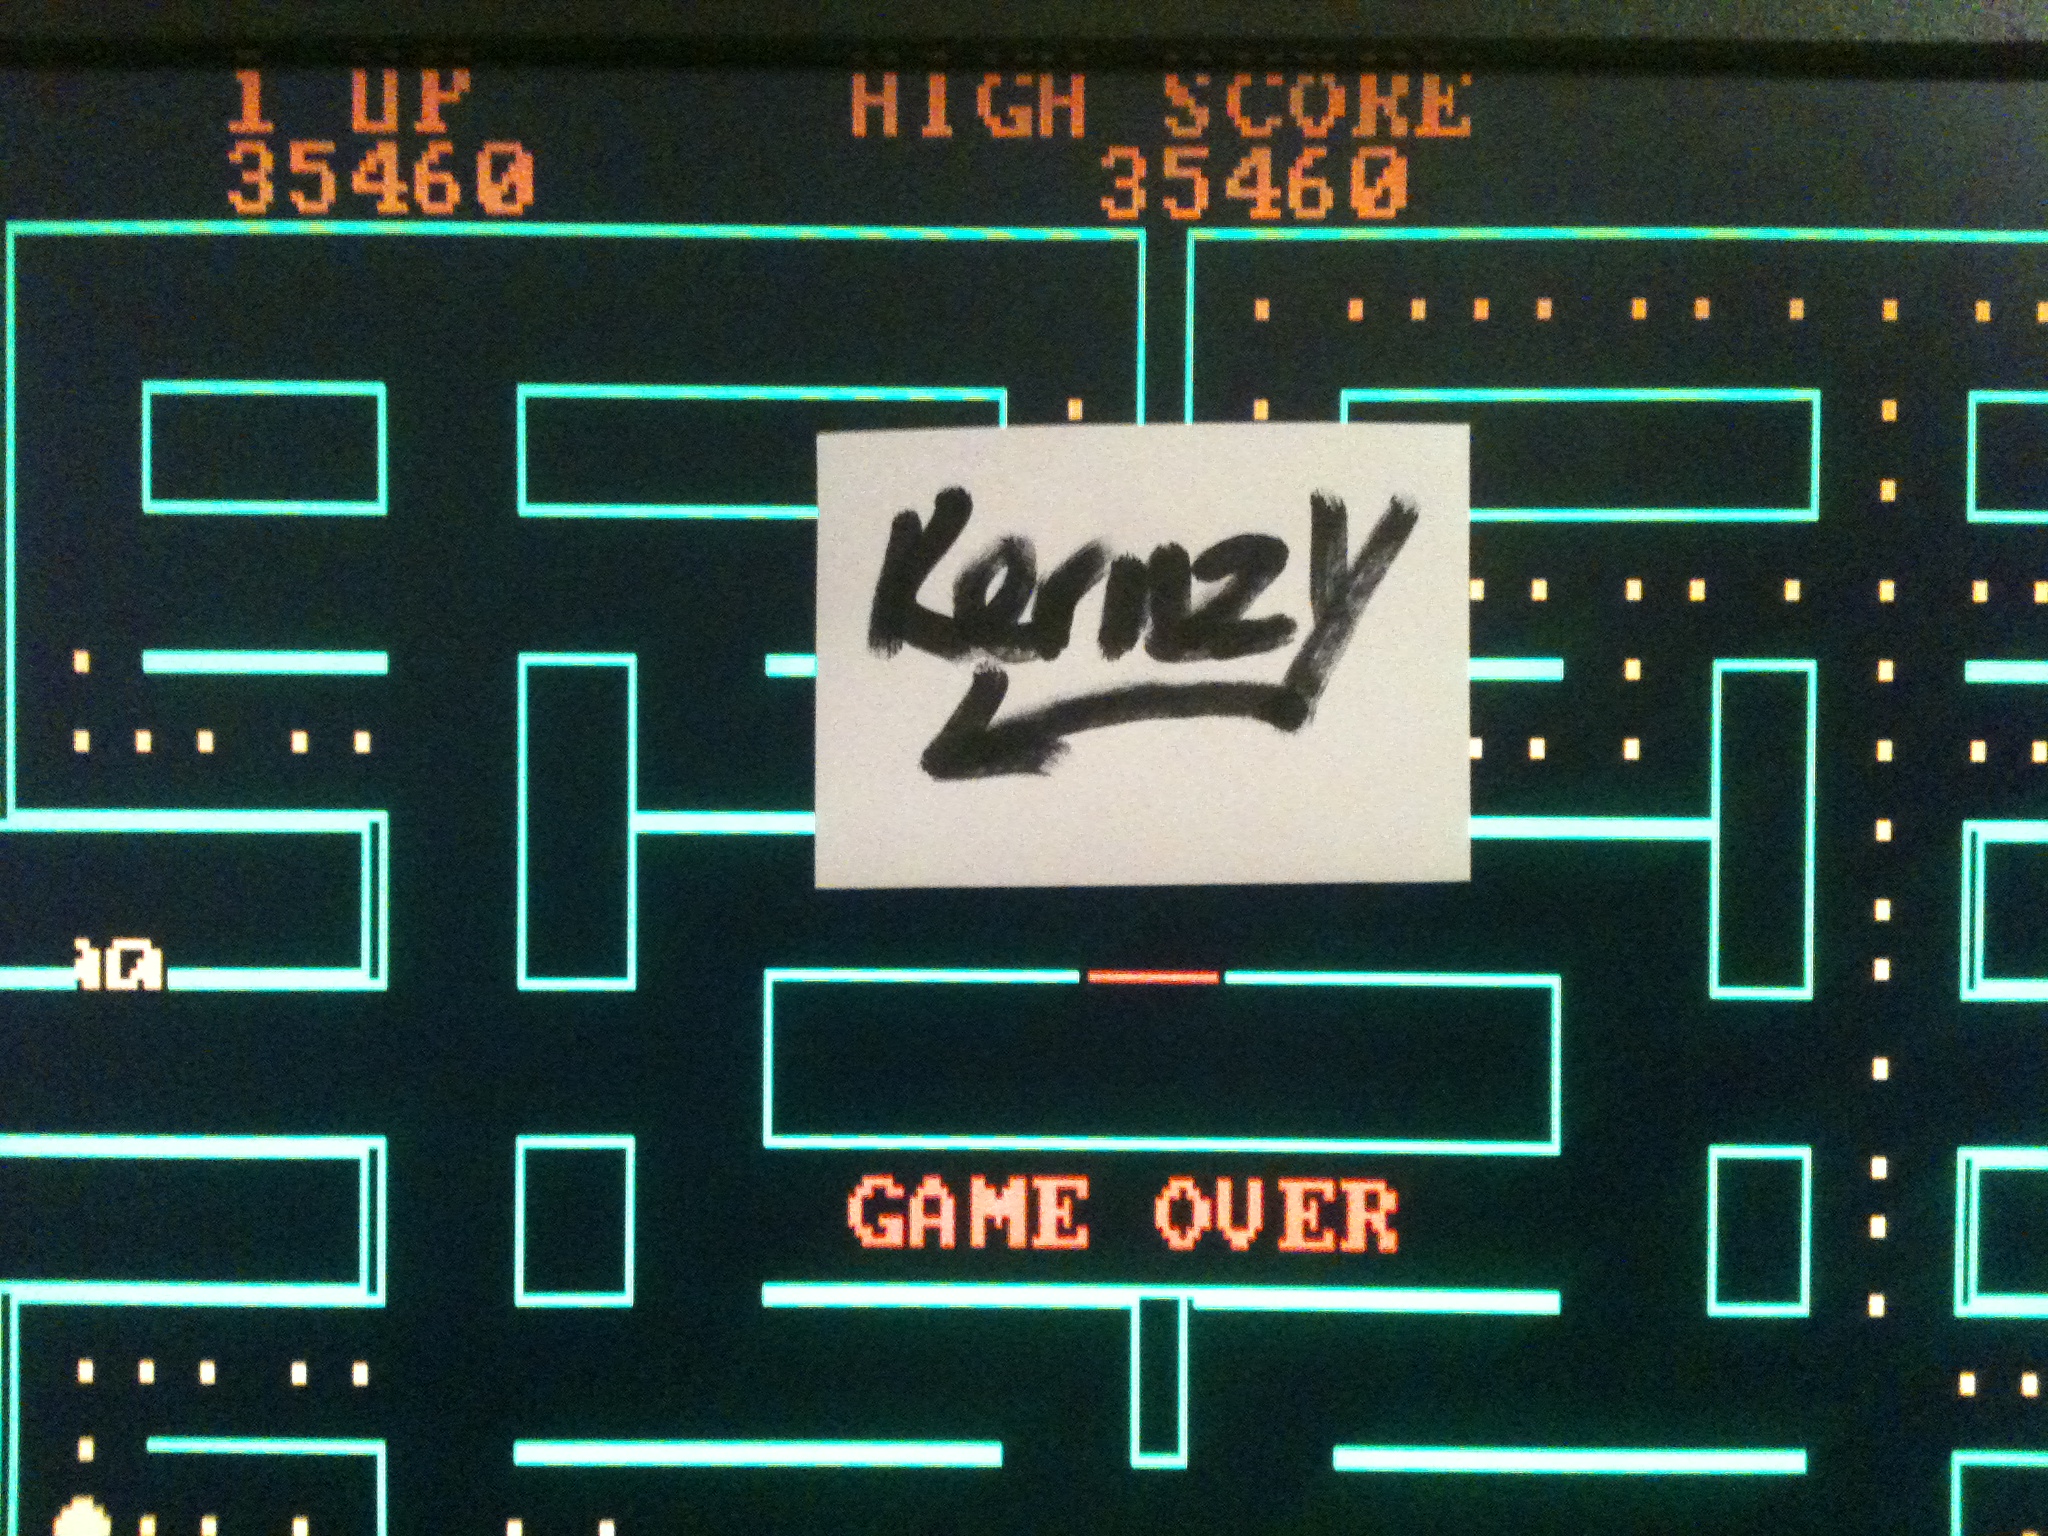 kernzy: Pac-Man [Atarisoft] (PC Emulated / DOSBox) 35,460 points on 2015-01-26 10:47:40